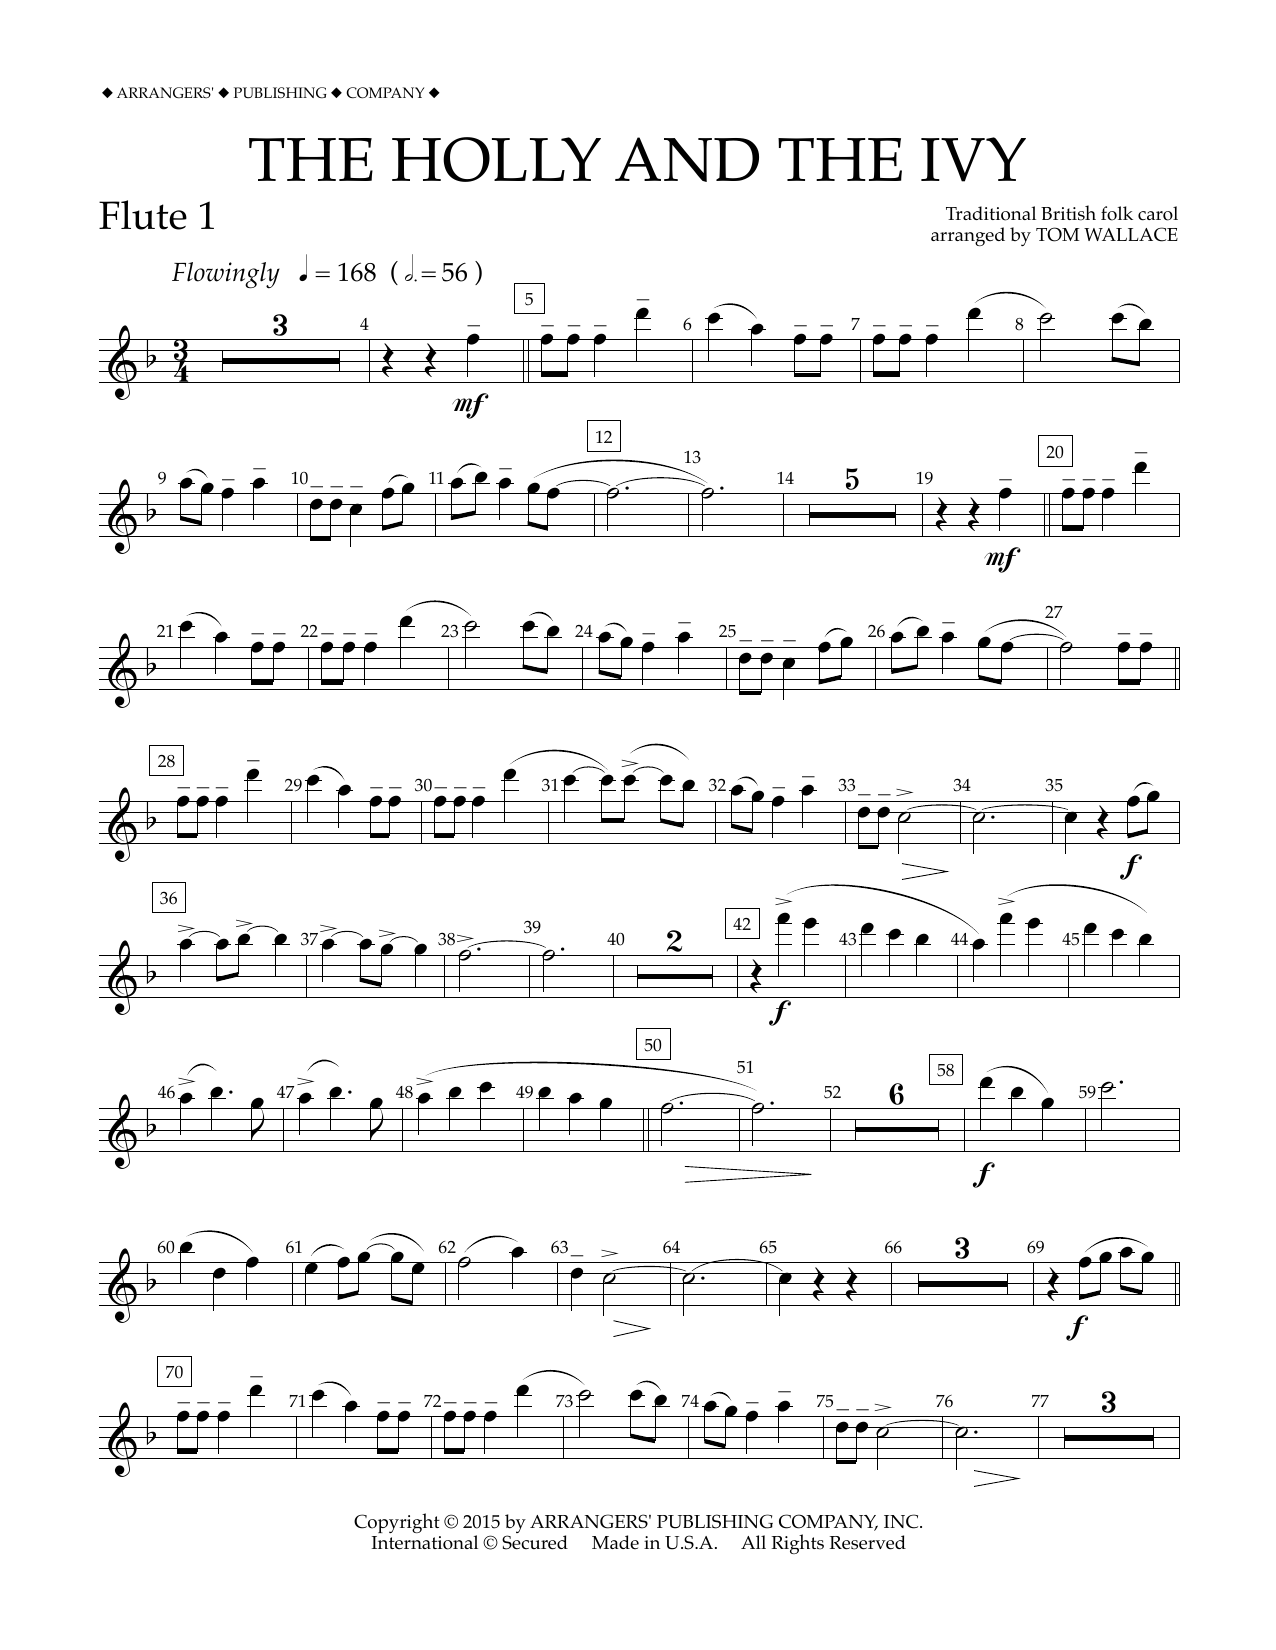 Download Tom Wallace The Holly and the Ivy - Flute 1 Sheet Music